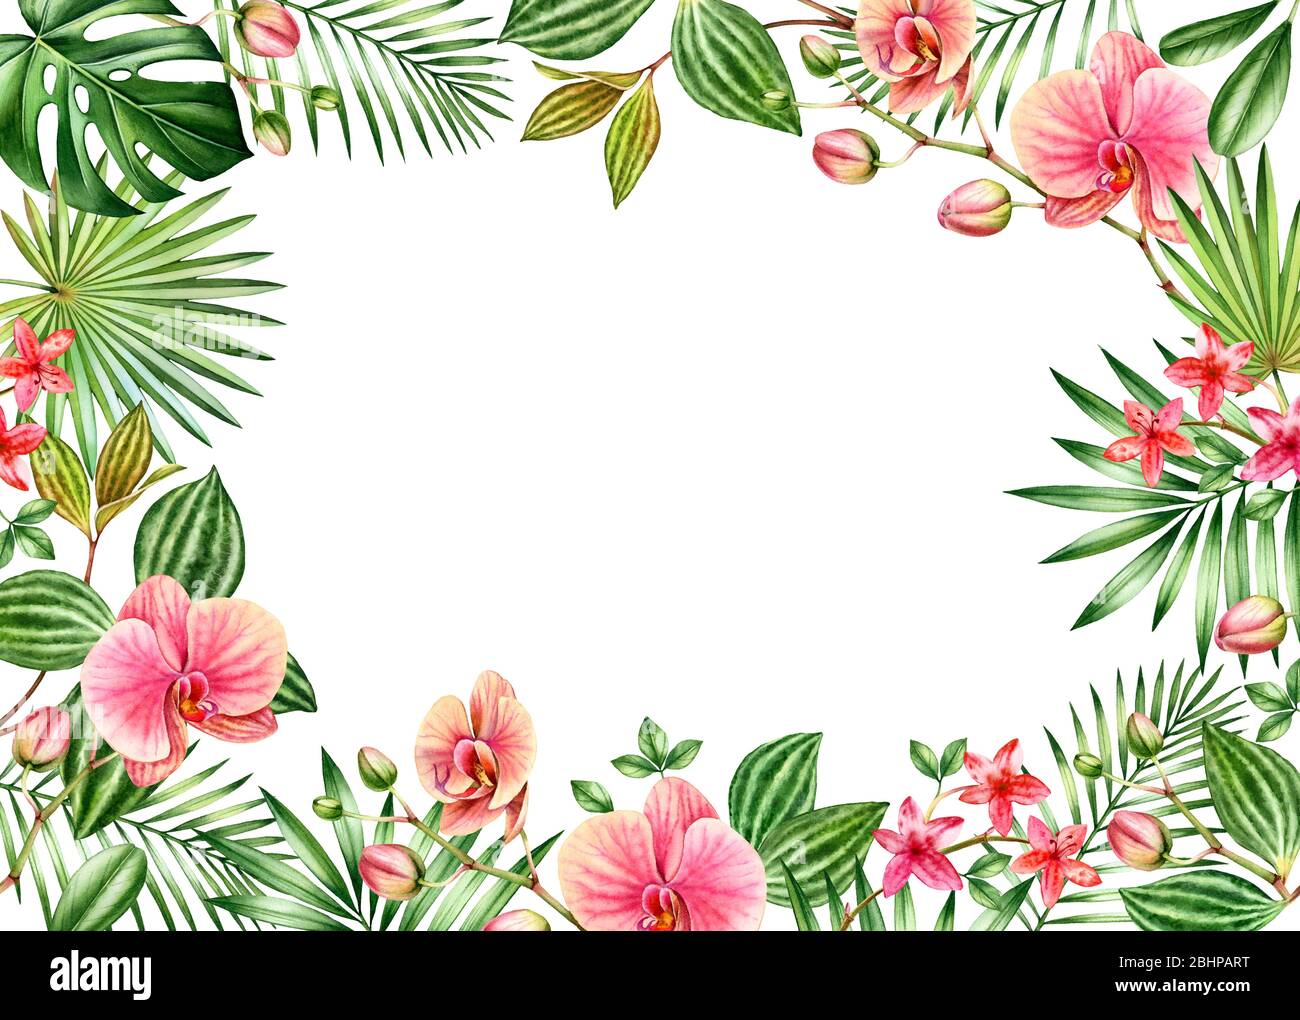 Watercolor floral background. Horizontal frame with place for text. Orange orchid flowers and palm leaves. Hand painted tropical banner. Botanical Stock Photo